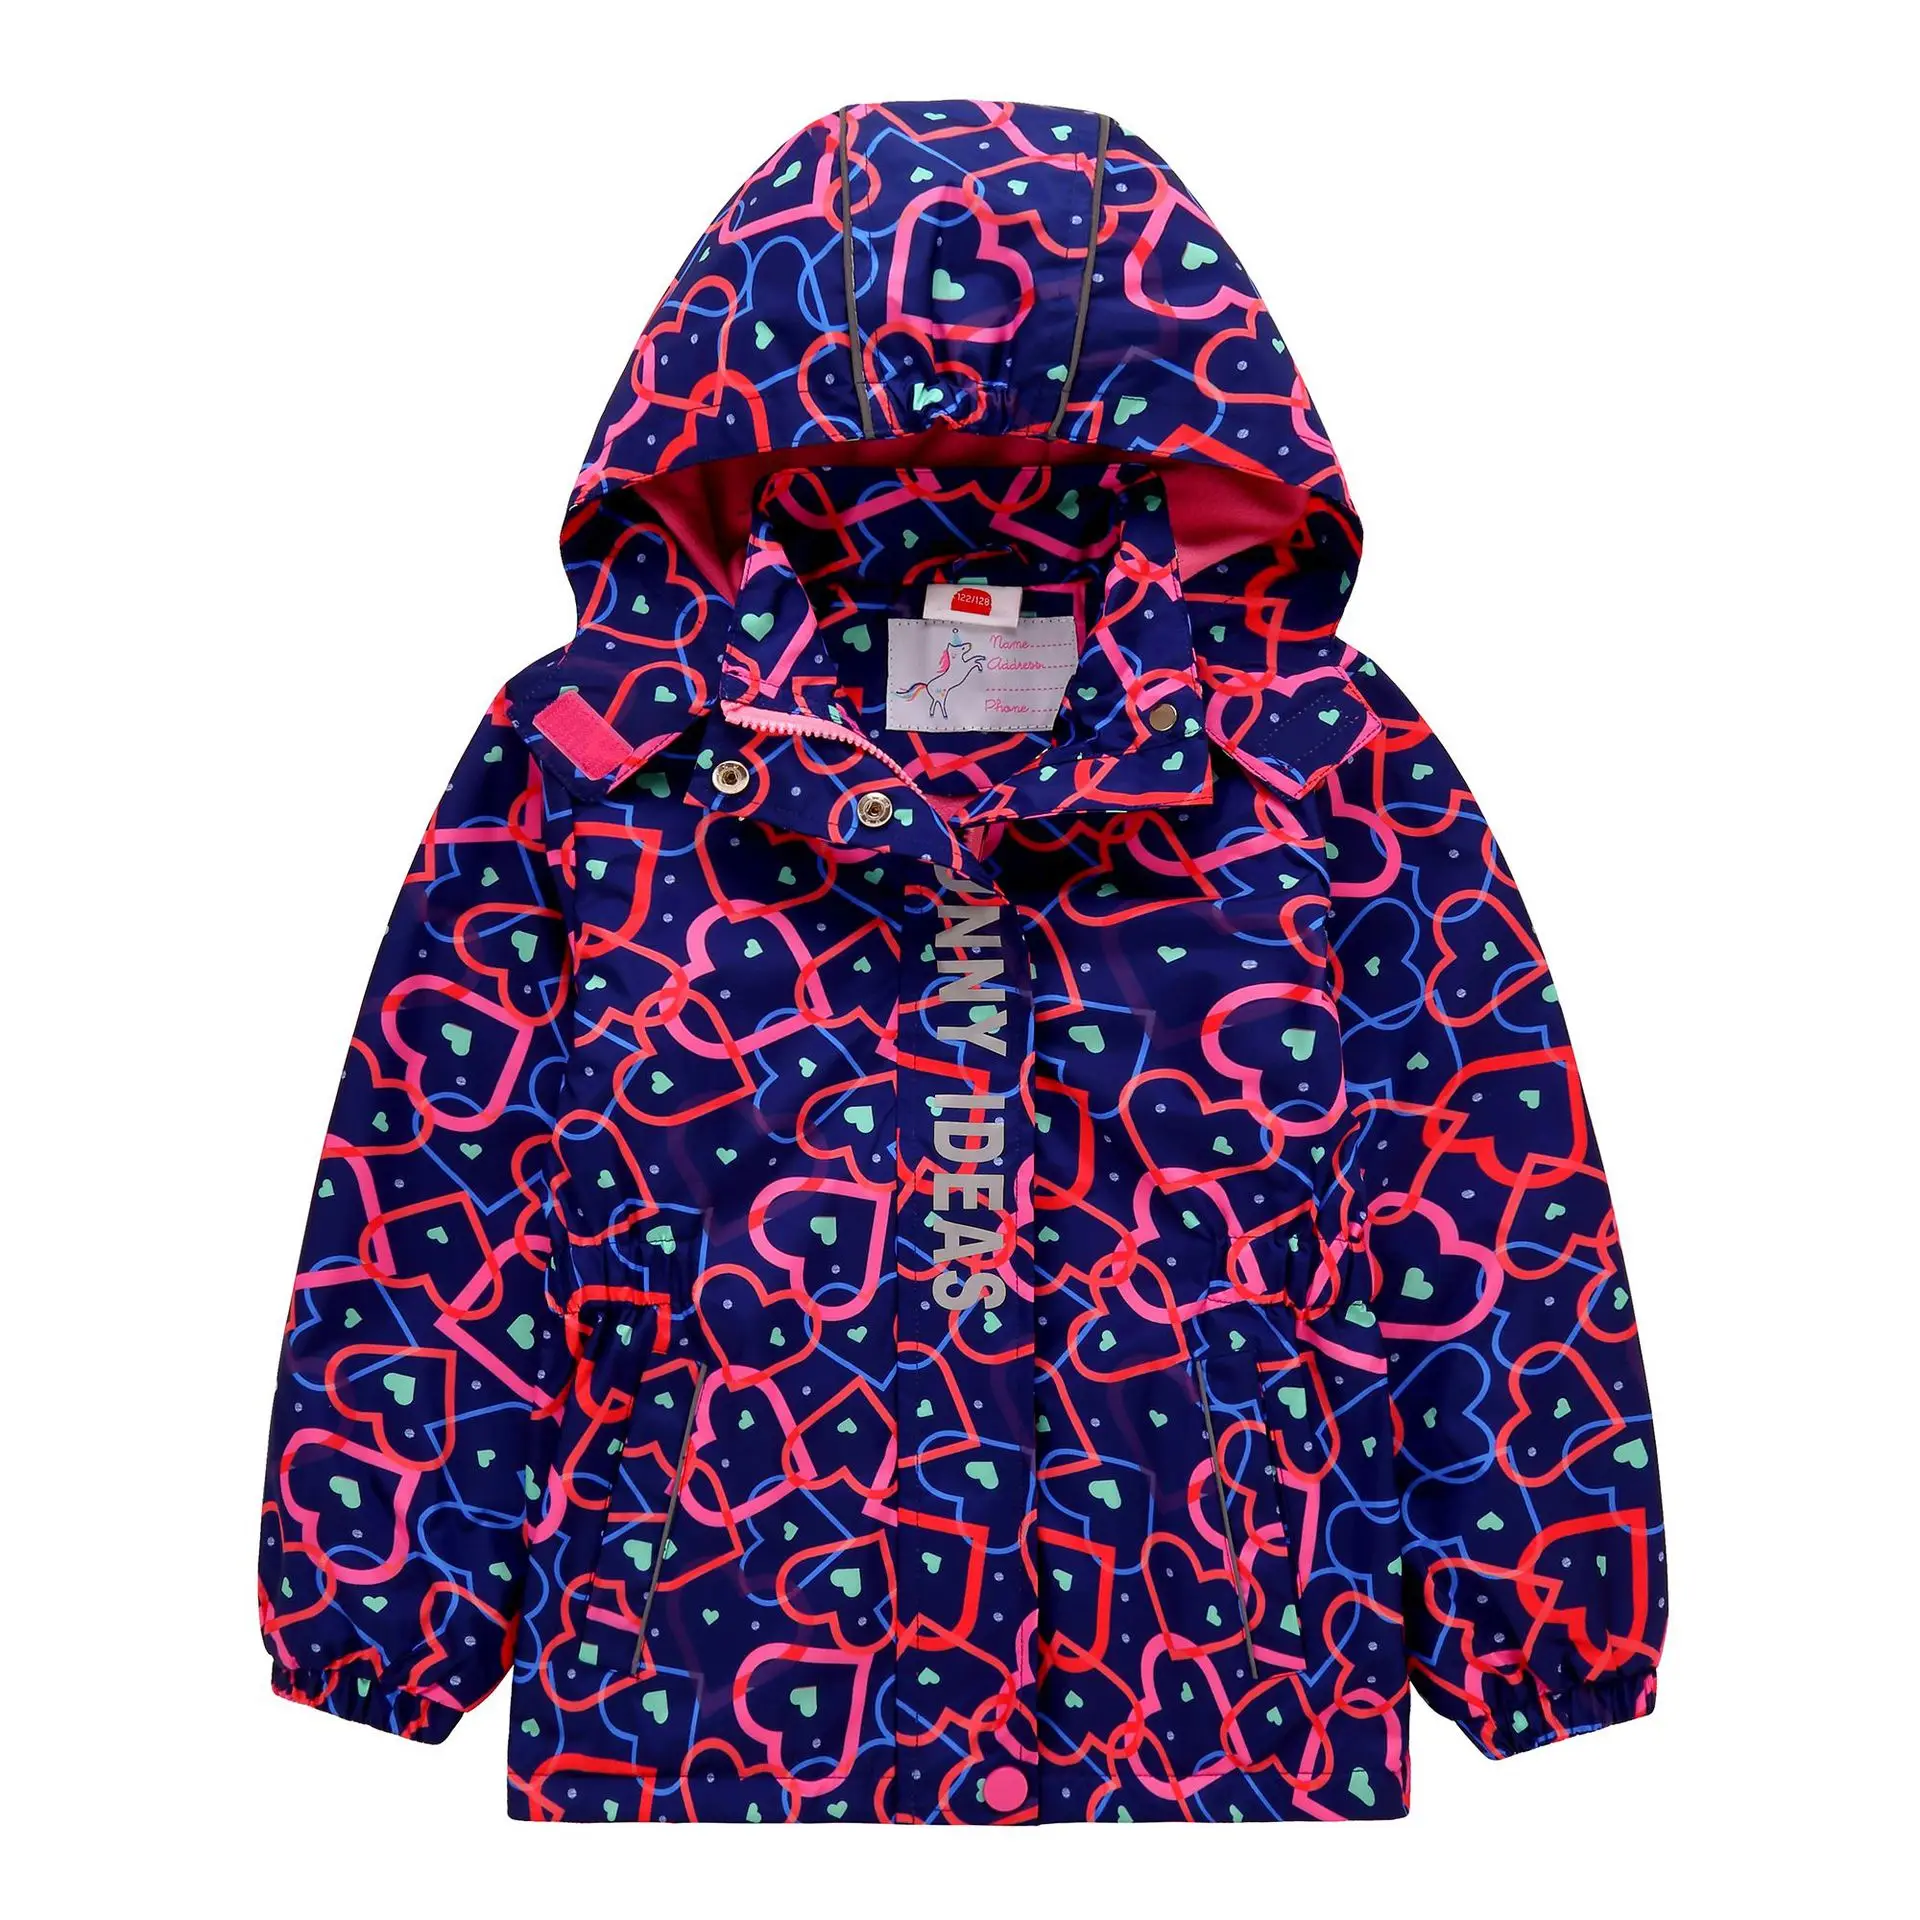 Waterproof Fleece Padded Baby Girls Coats Lovely Child Jackets Full Zip Hooded Kids Outfits Children Outerwear 3-12 Years red and black plaid jacket Outerwear & Coats